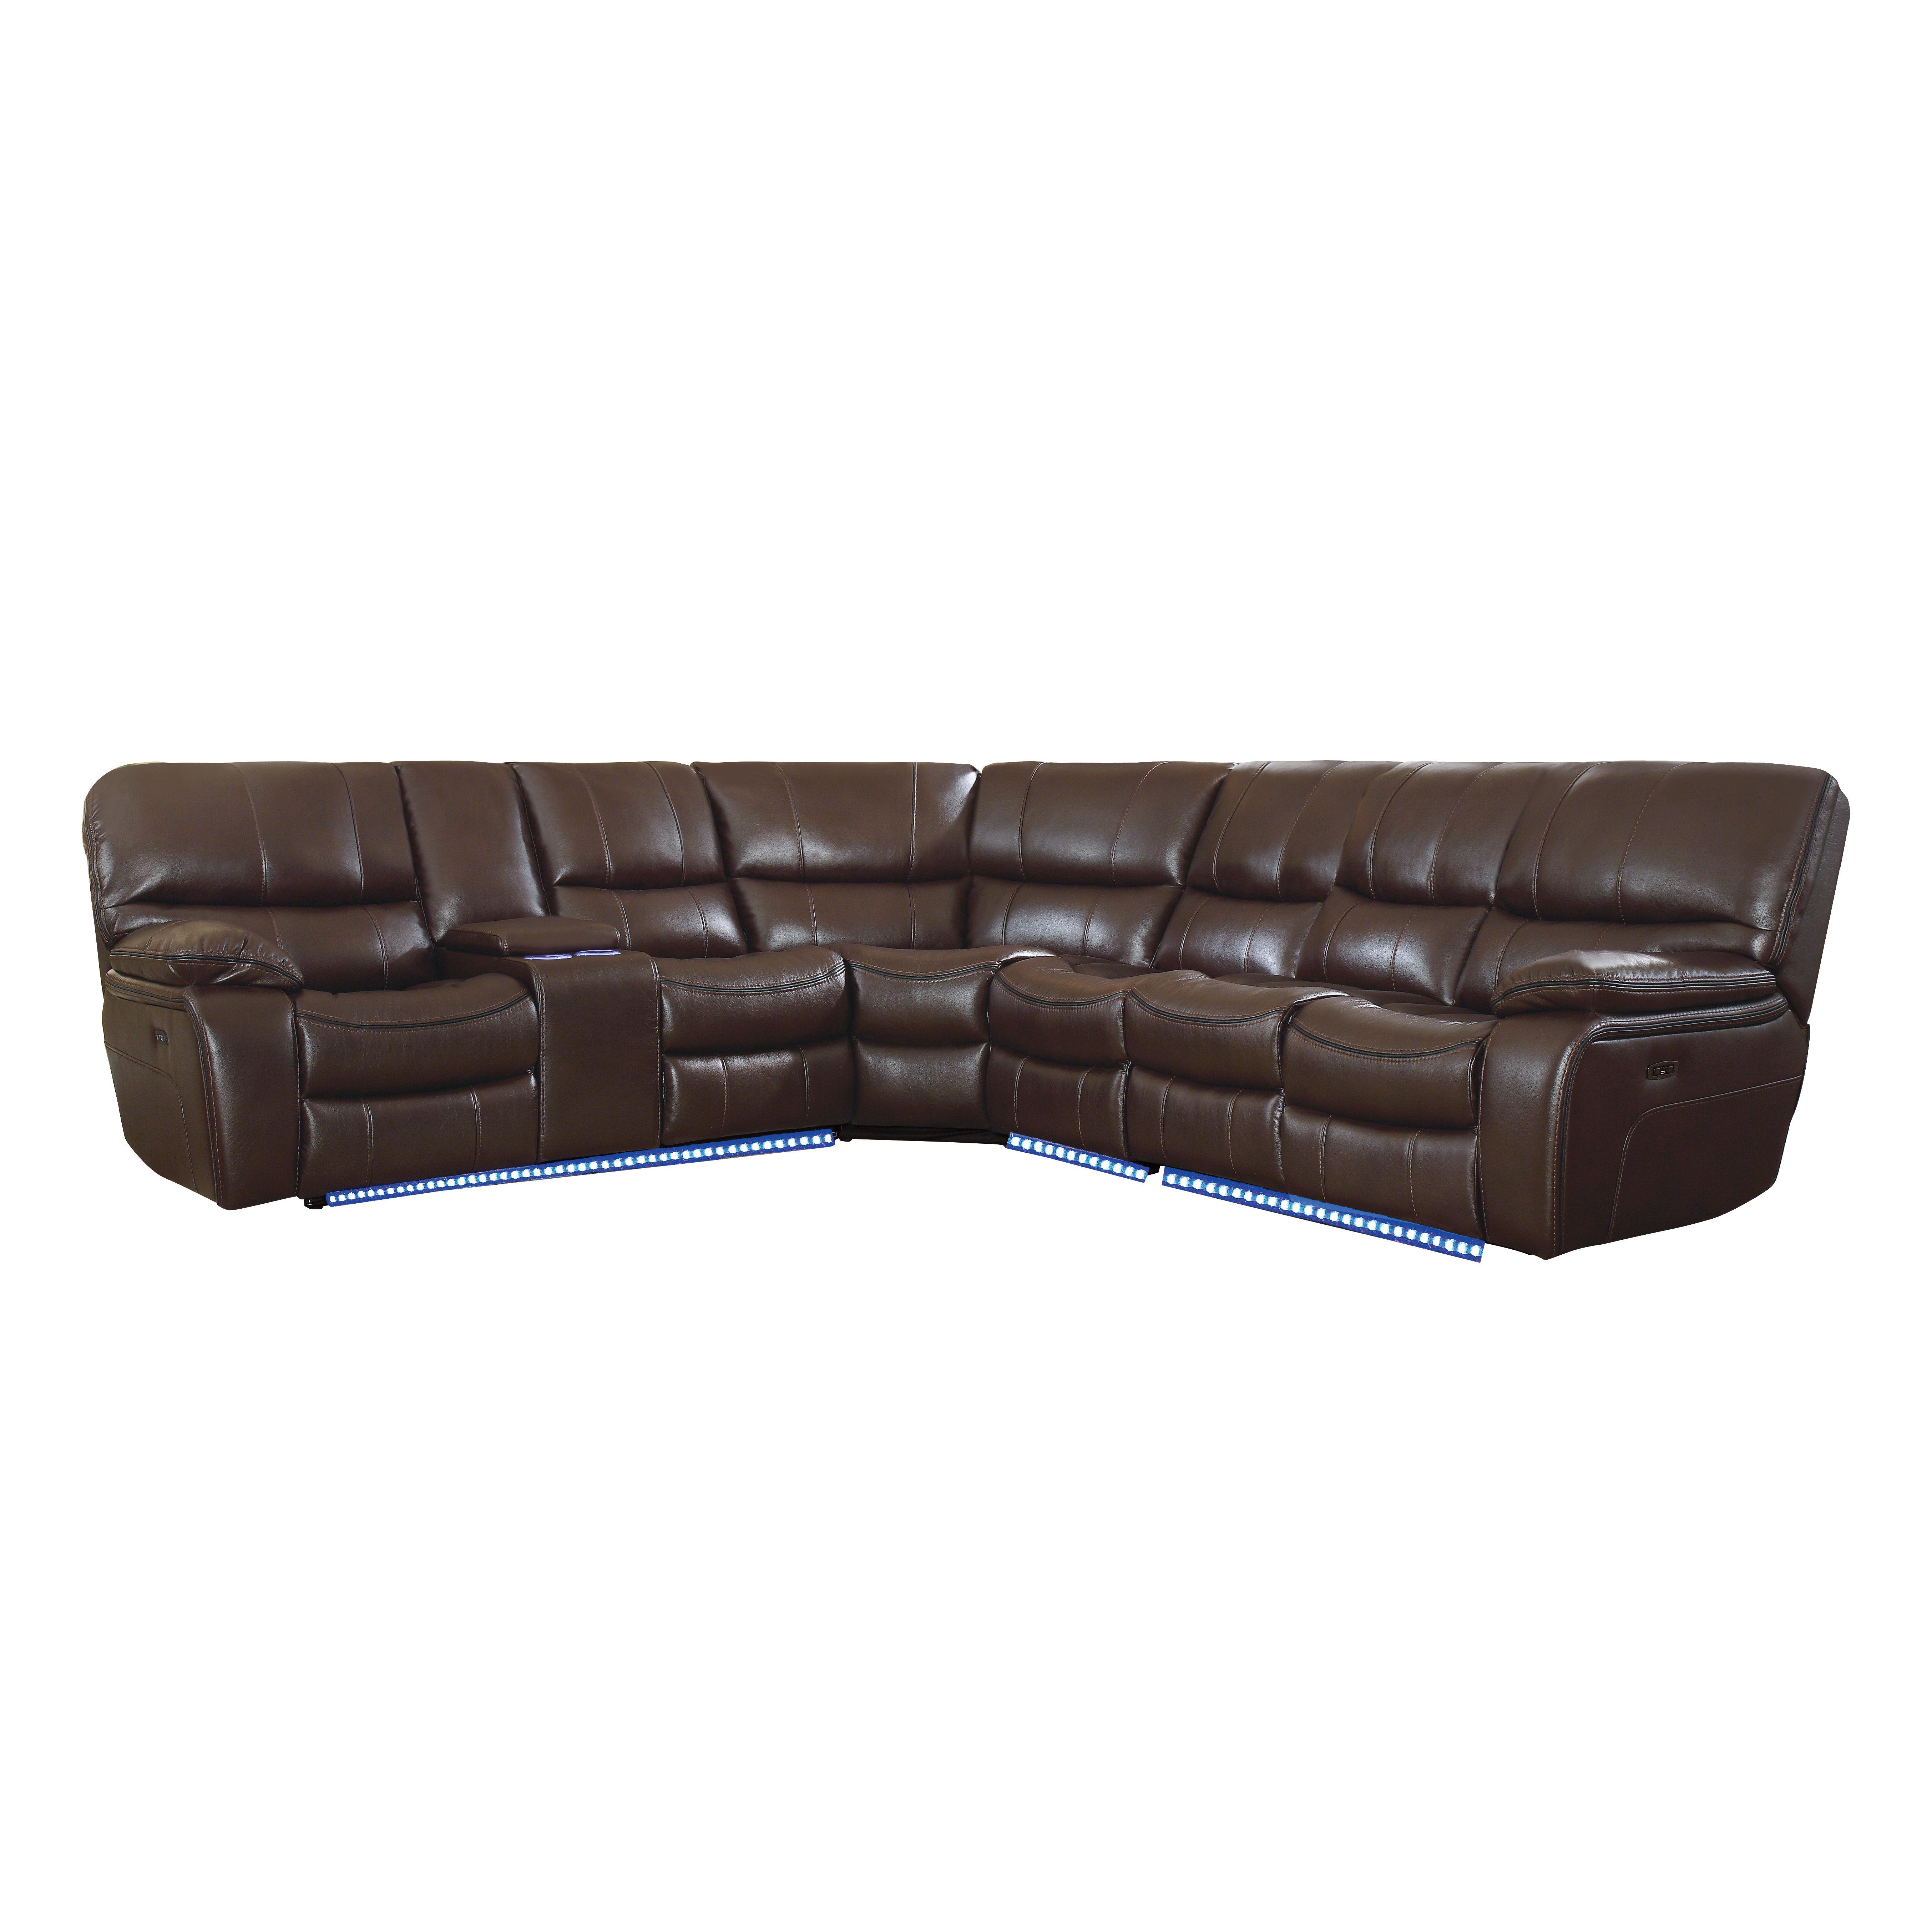 Homelegance 8480BRW*4SCPD Pecos Power Reclining Sectional